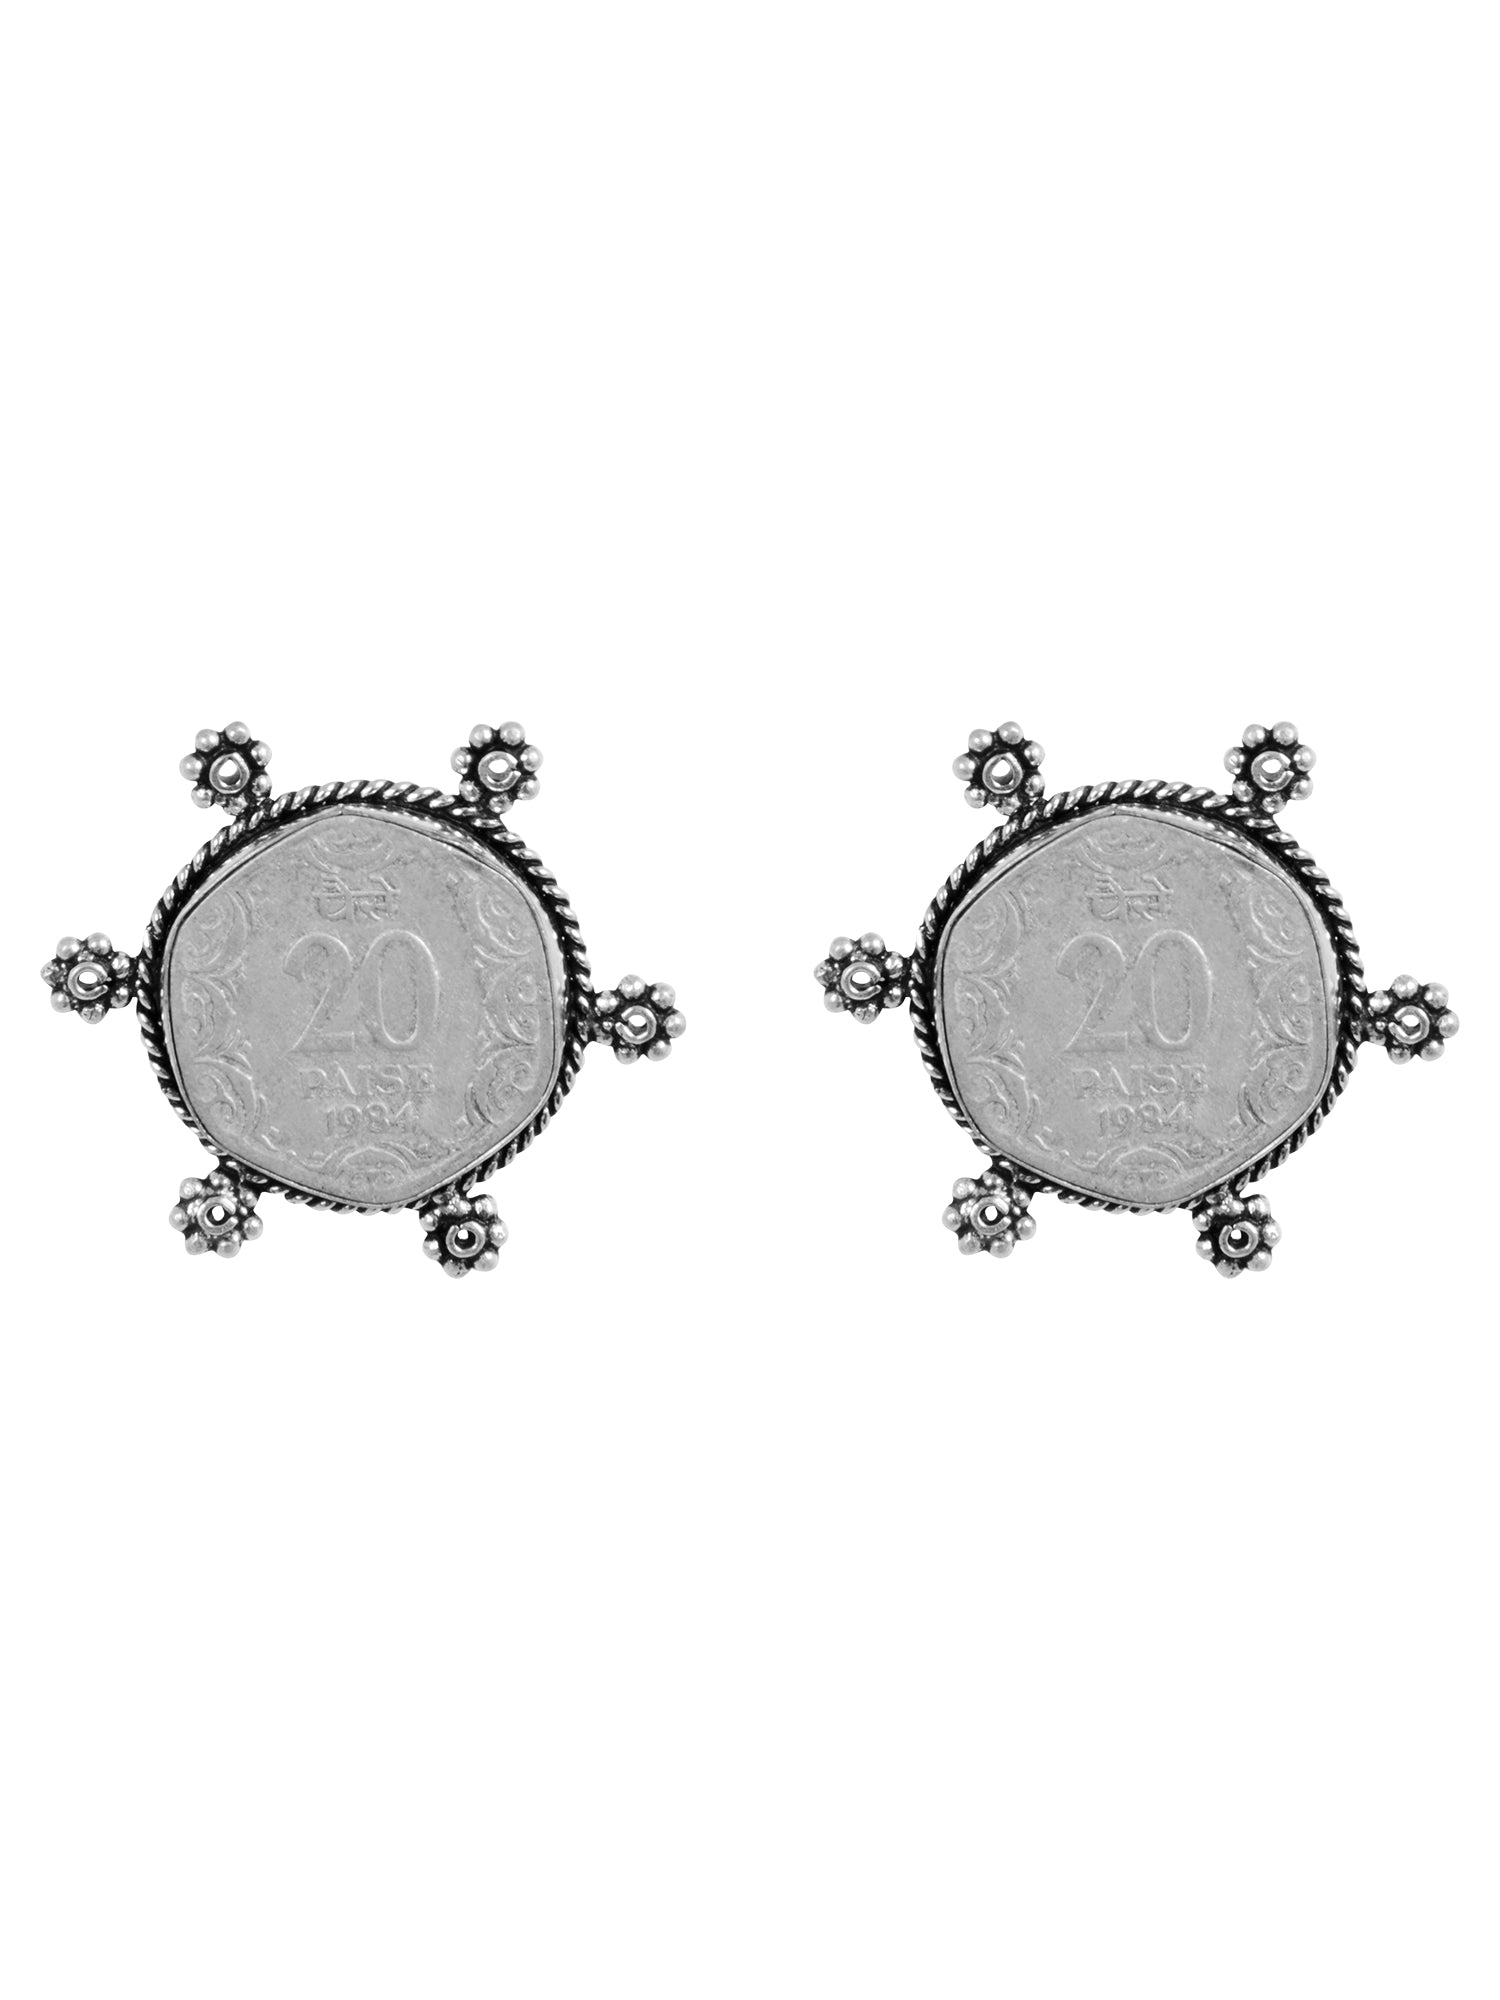 Vintage German Silver Coin Collection Earrings